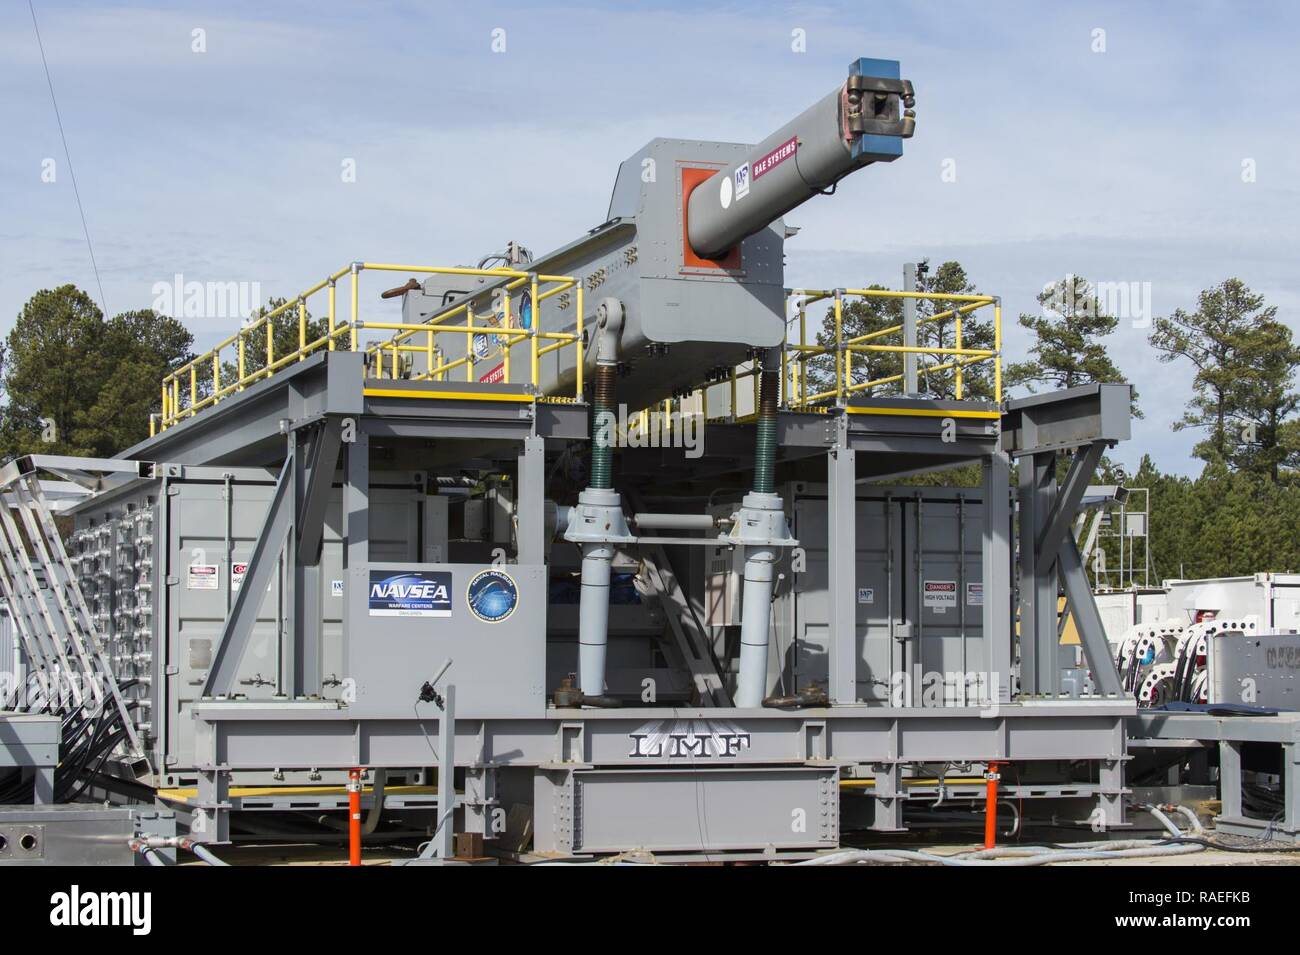 DAHLGREN, Va. (Jan. 12, 2017) The Office of Naval Research (ONR)-sponsored Electromagnetic Railgun (EMRG) at terminal range located at Naval Surface Warfare Center Dahlgren Division (NSWCDD). The EMRG launcher is a long-range weapon that fires projectiles using electricity instead of chemical propellants. Stock Photo